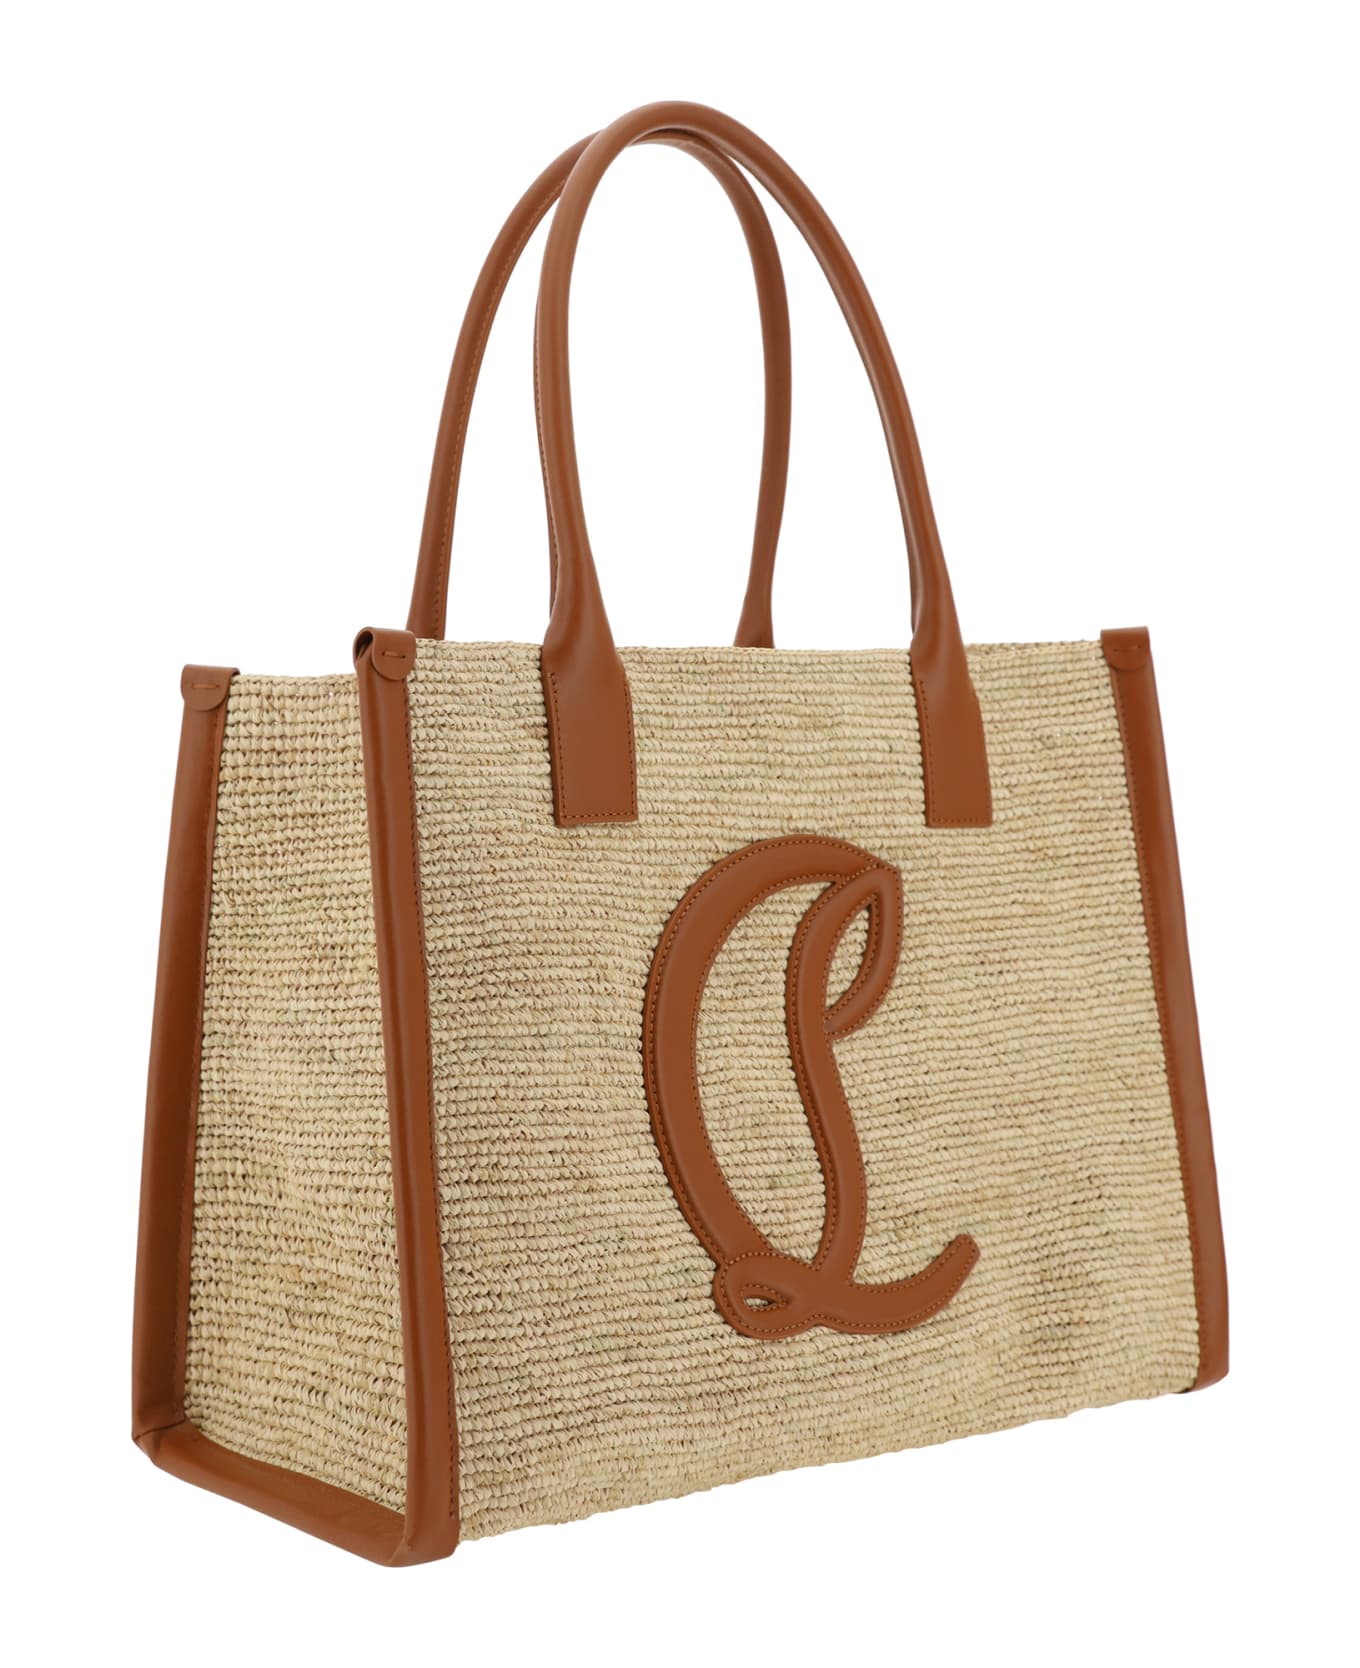 Christian Louboutin By My Side Large Tote Handbag - Natural/cuoio